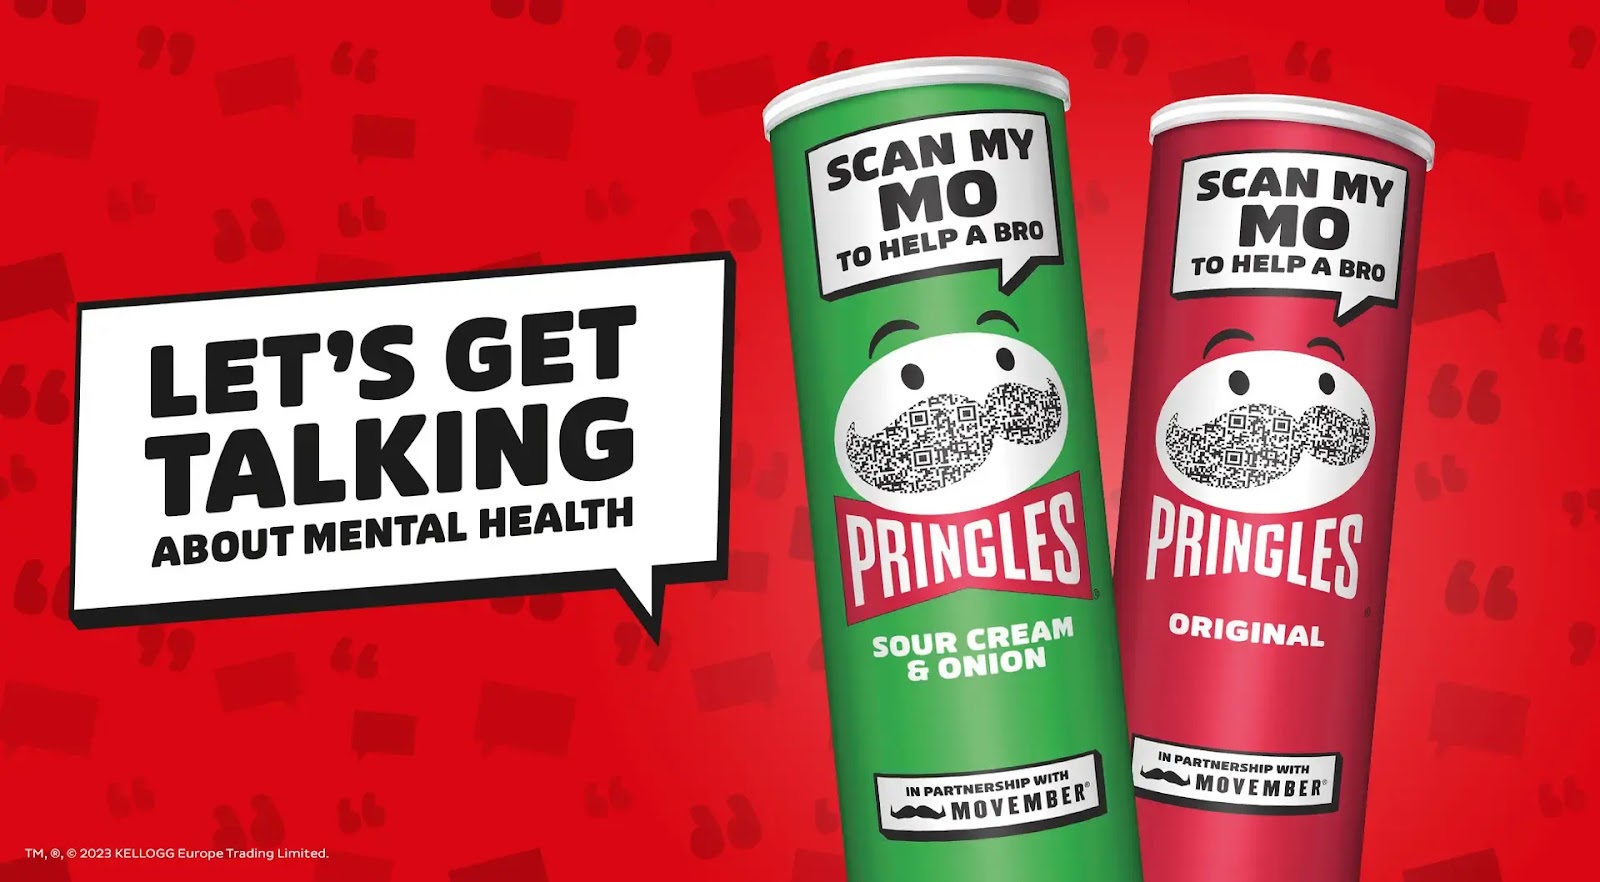 Pringles’ "Let's get talking about mental health" campaign with Movember